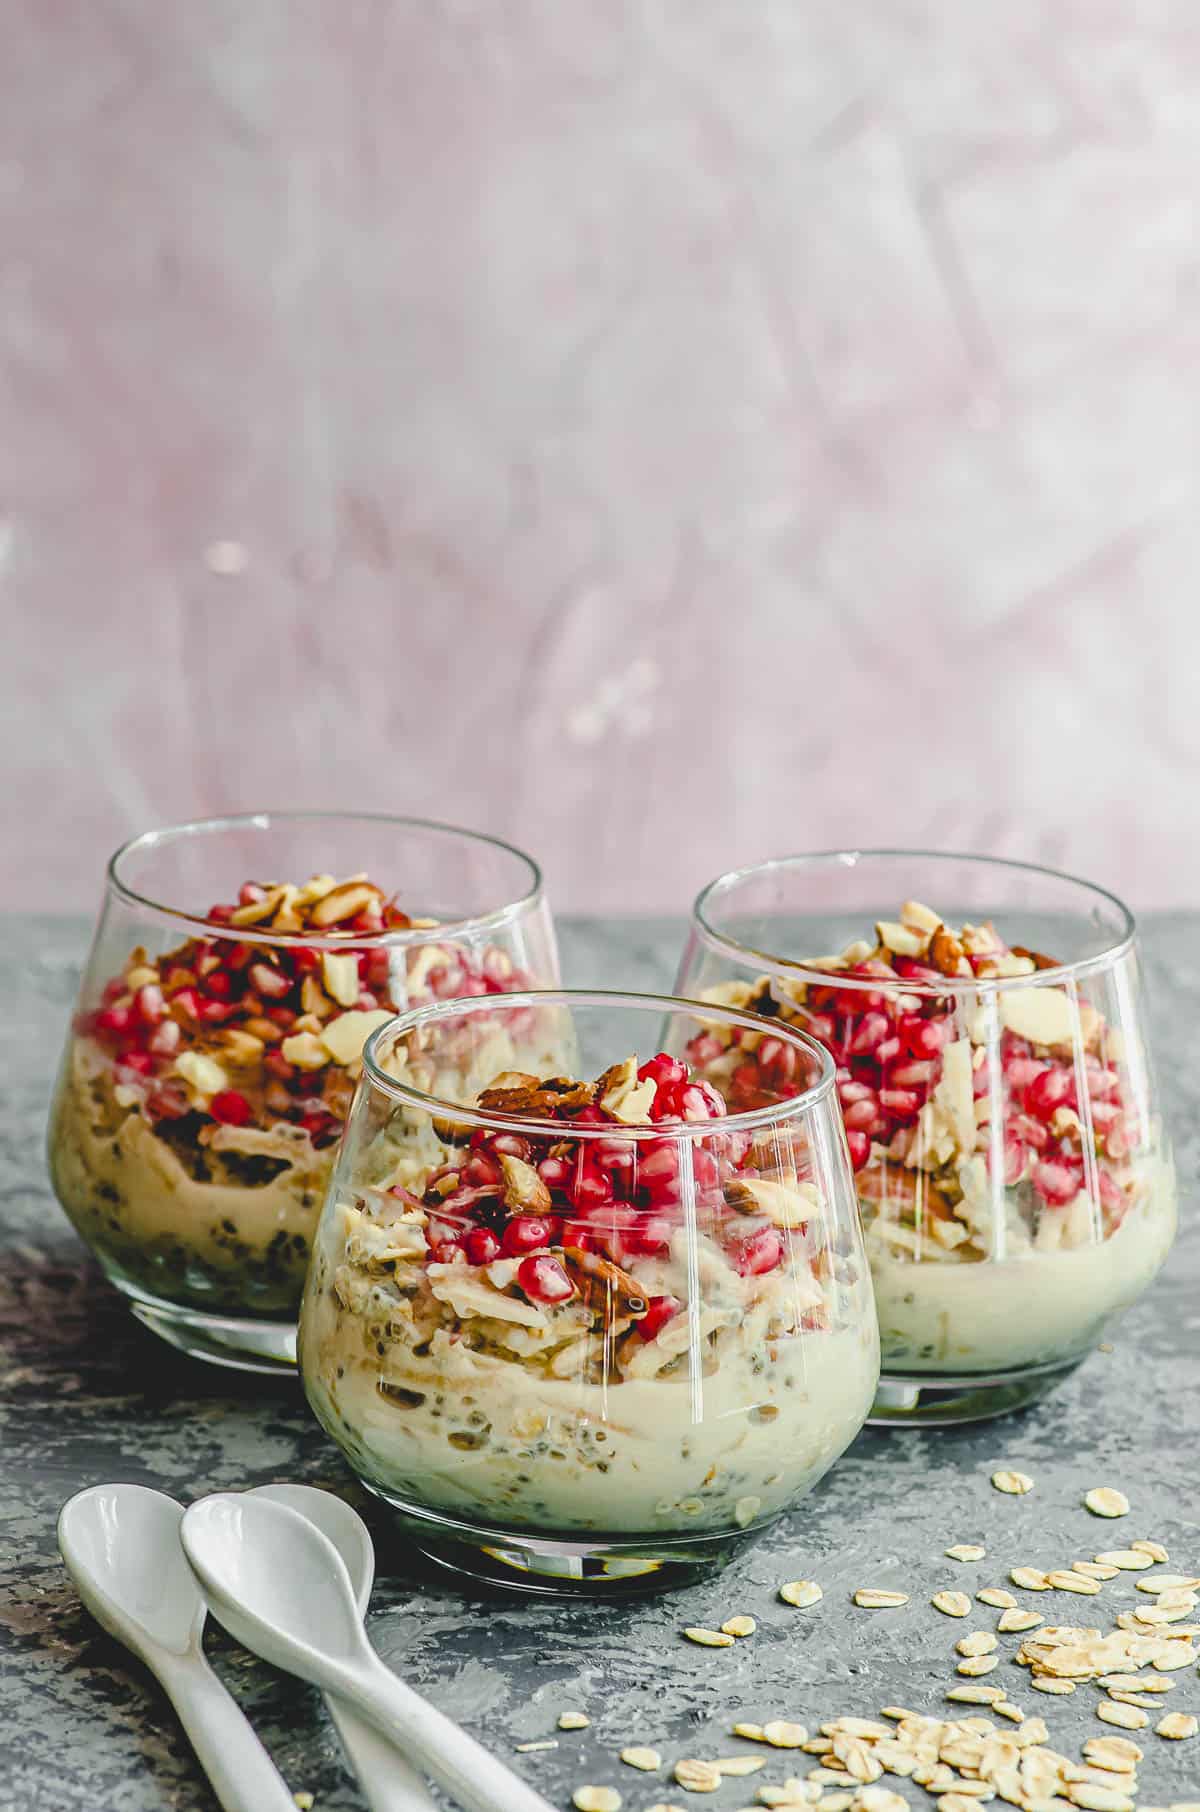 Overnight Oats with Apples and Pomegranates May I Have That Recipe?